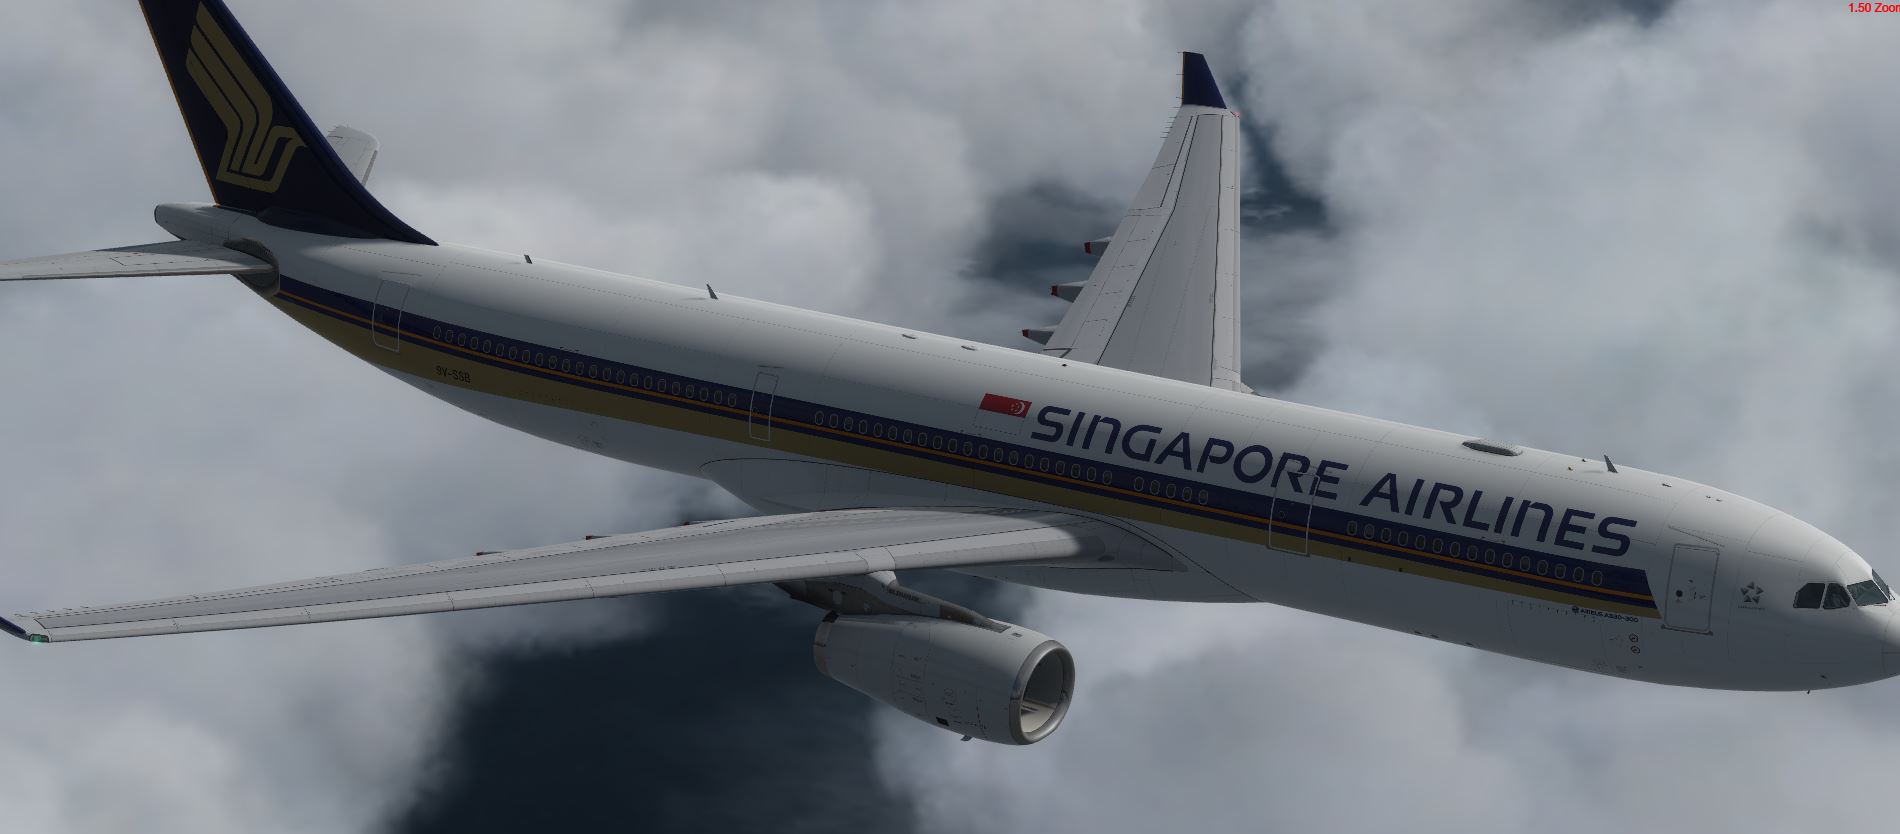 AS A330 Singapore Airlines-8309 